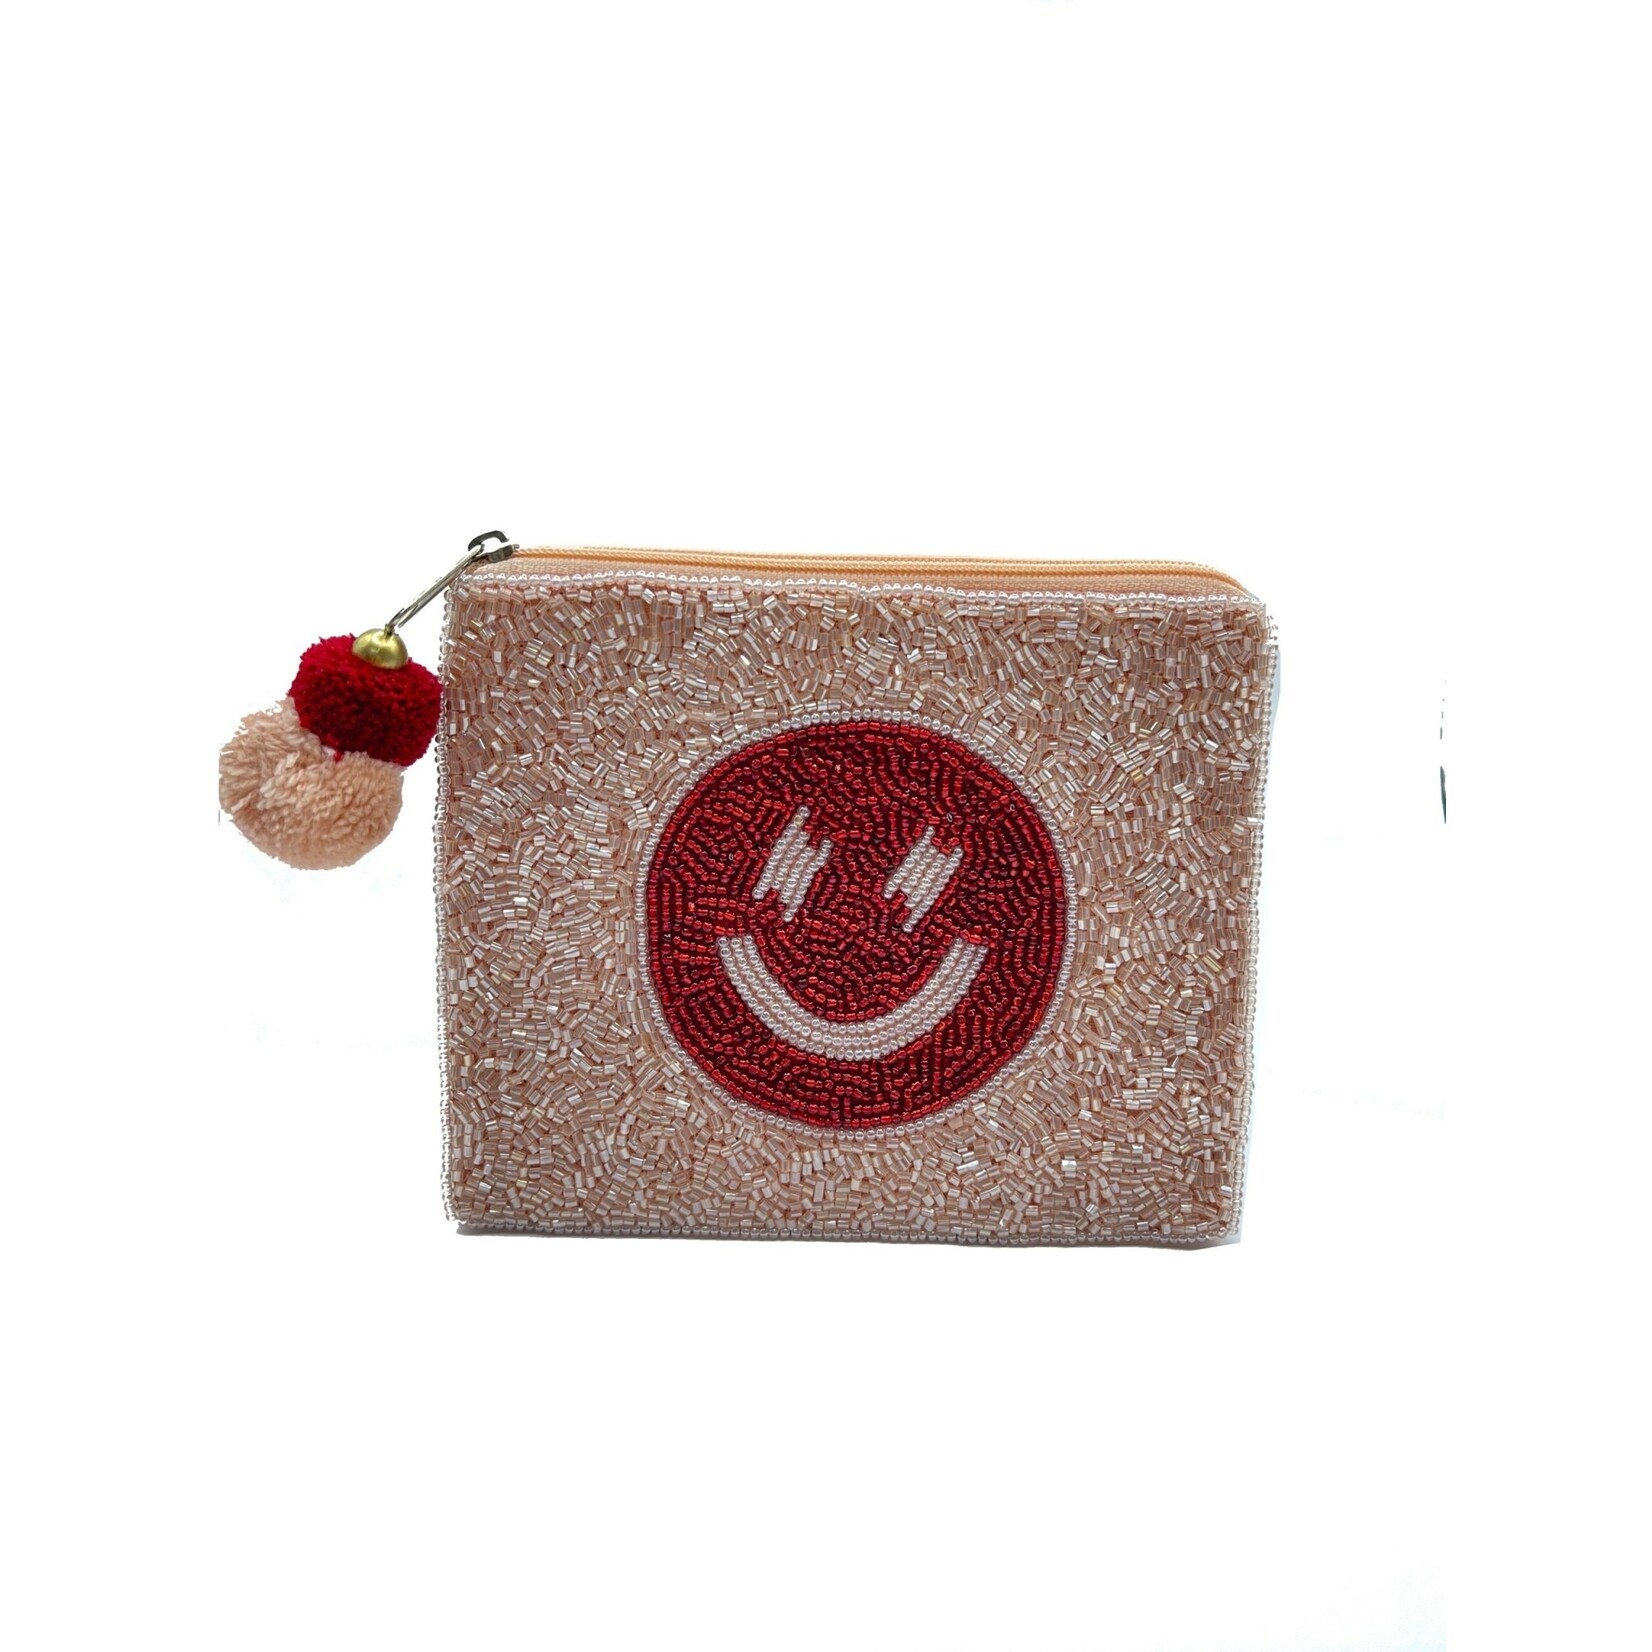 La Chic Designs Pink Smiley Red Face Pouch